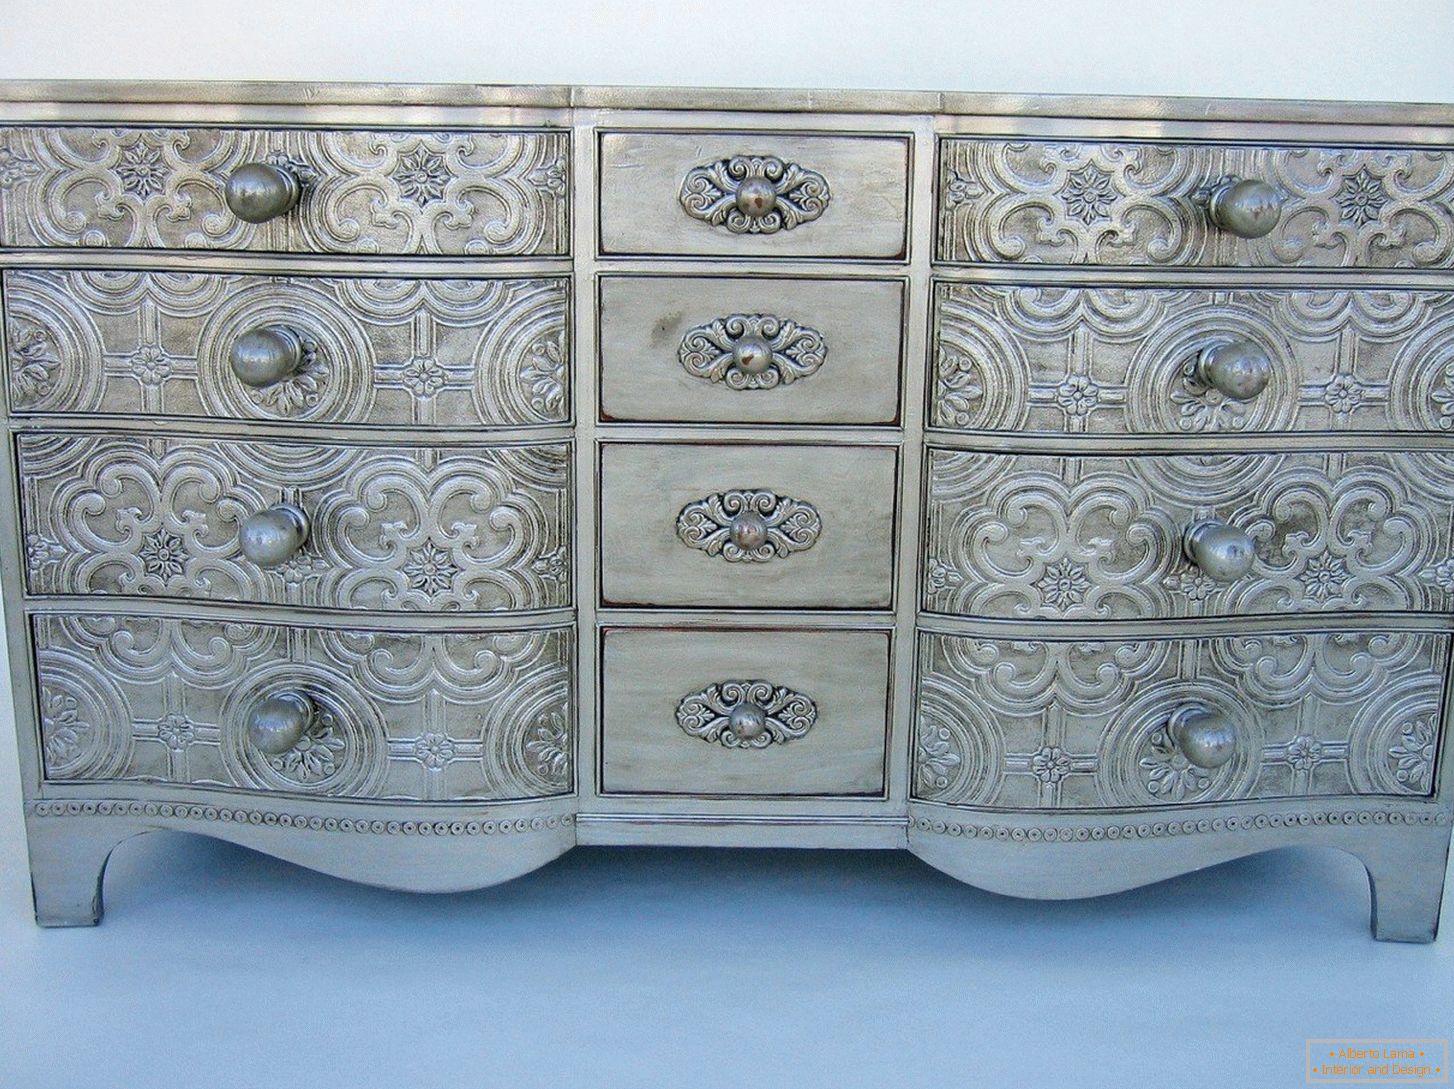 Chest of drawers with three-dimensional decor